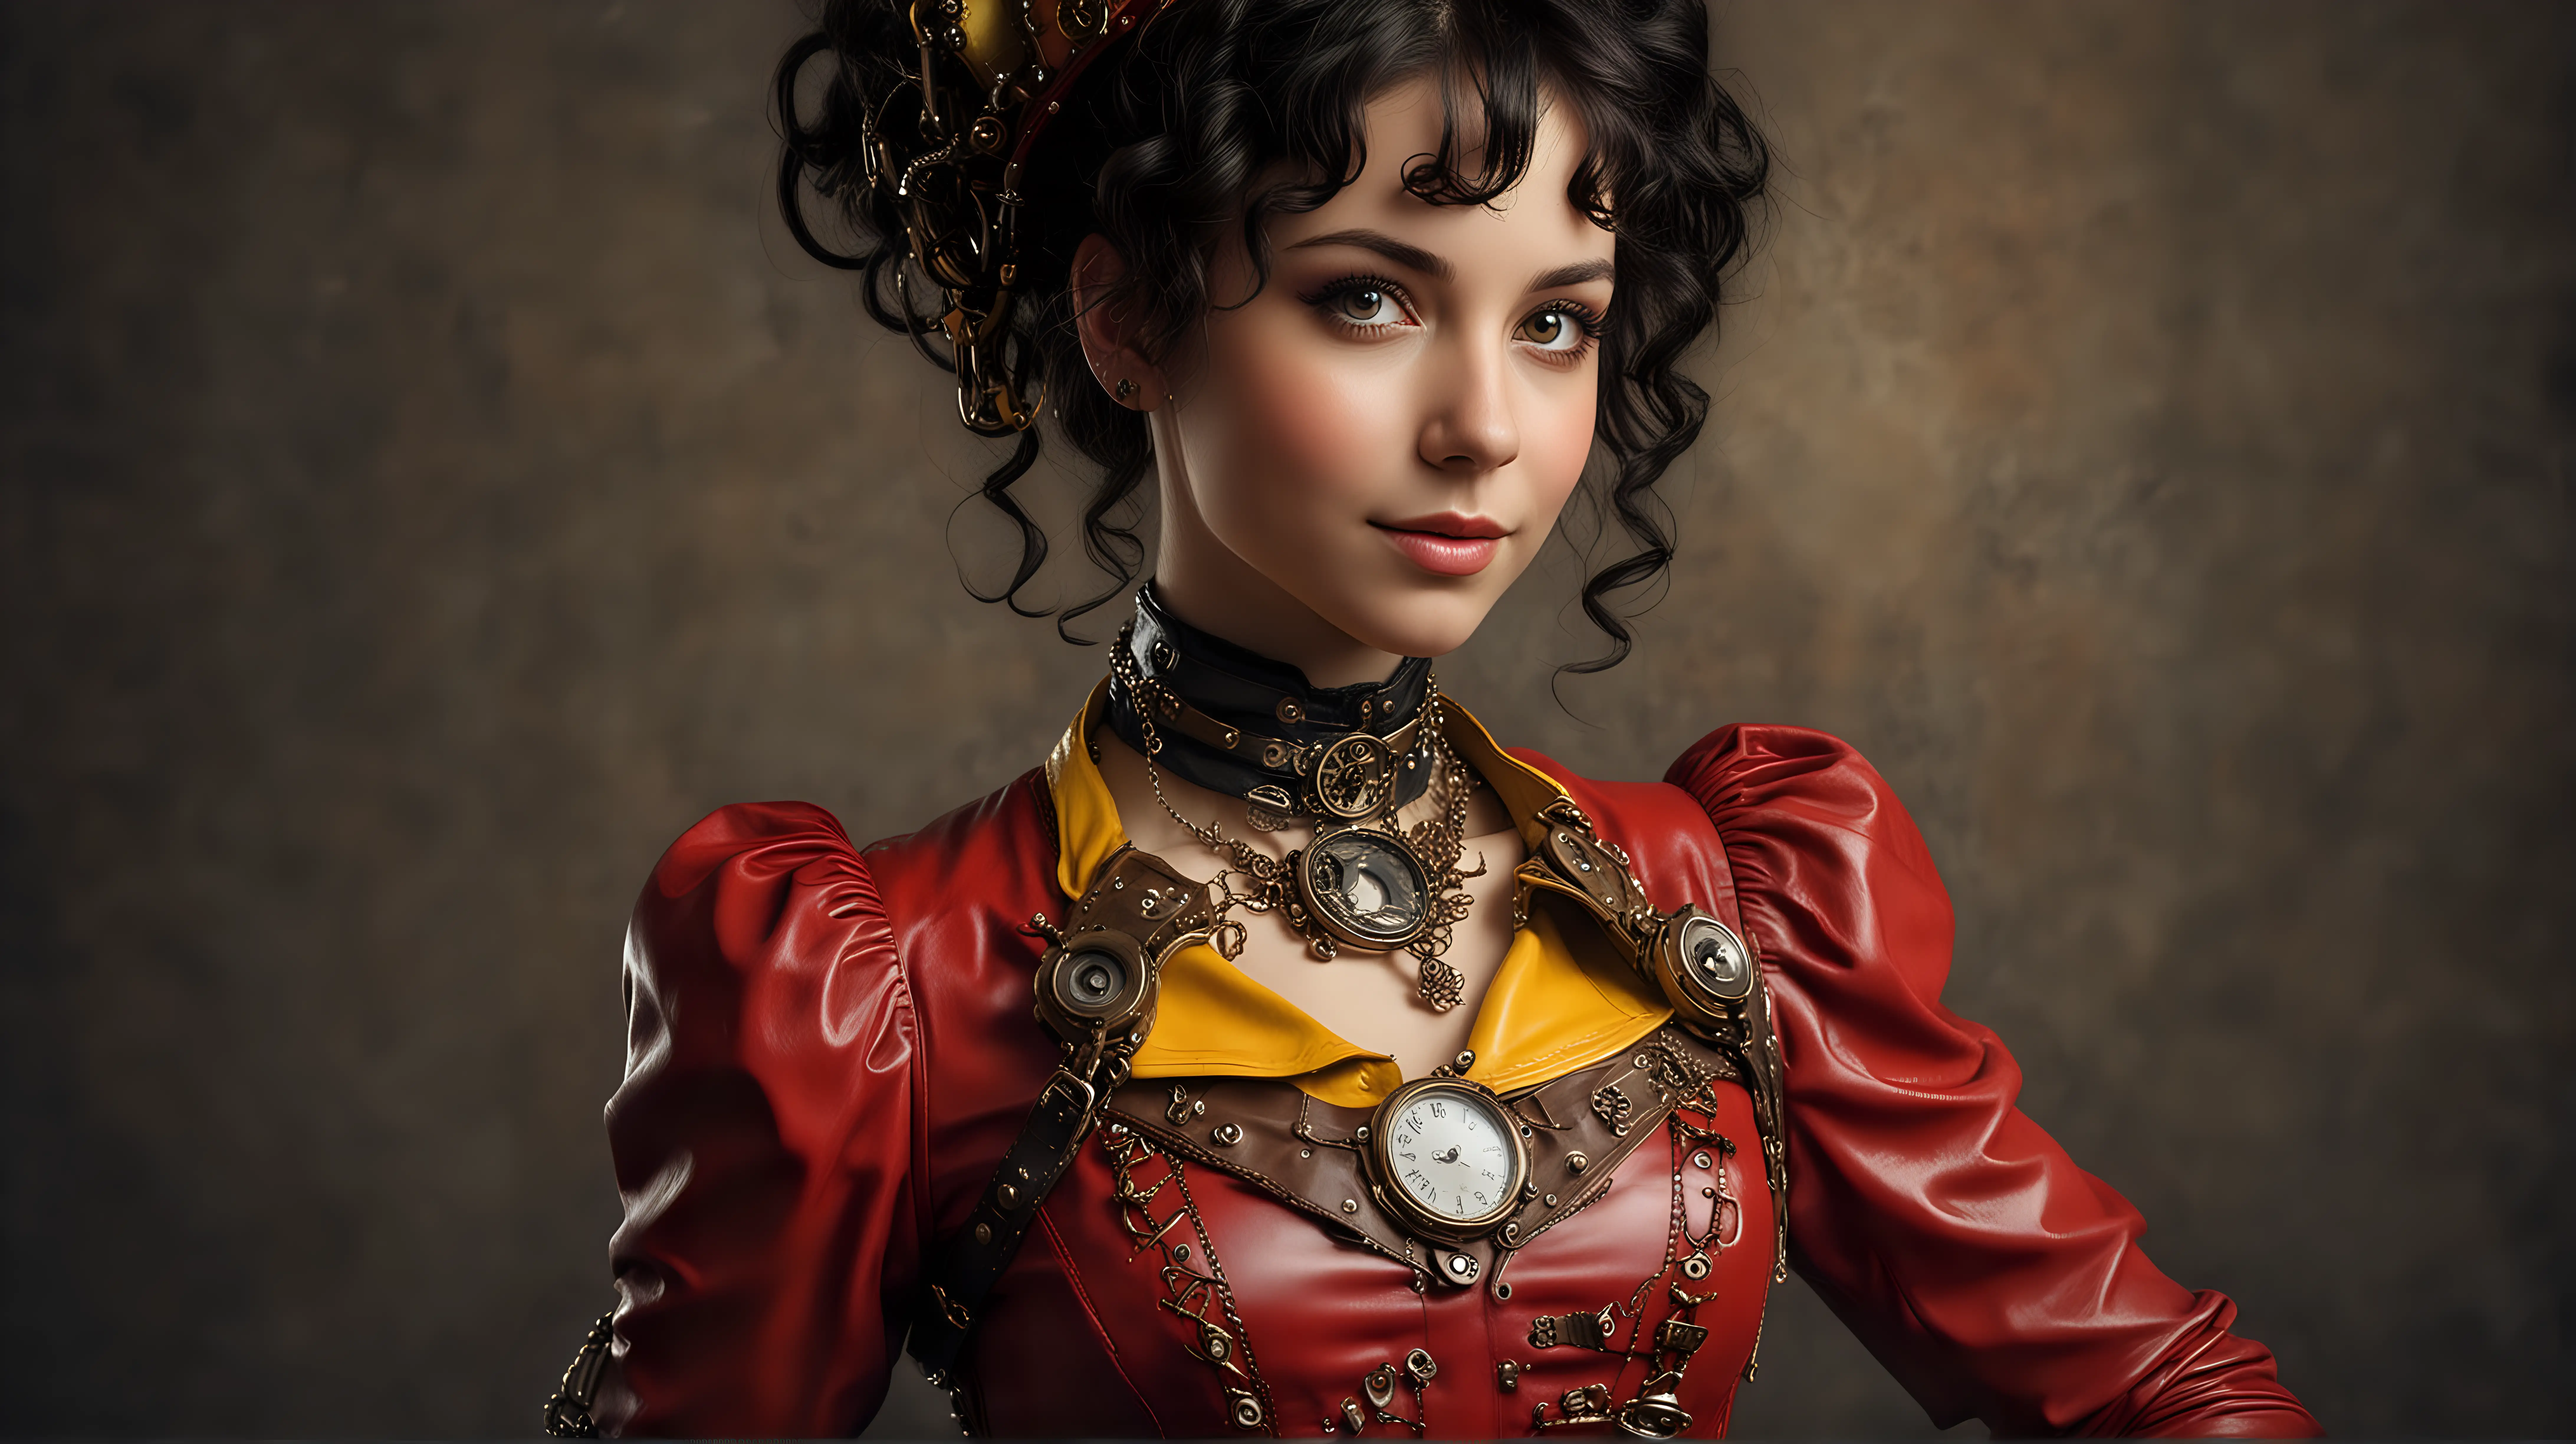 Steampunk Woman Portrait in Red and Yellow Leather Dress with Delicate Jewelry and Goggles